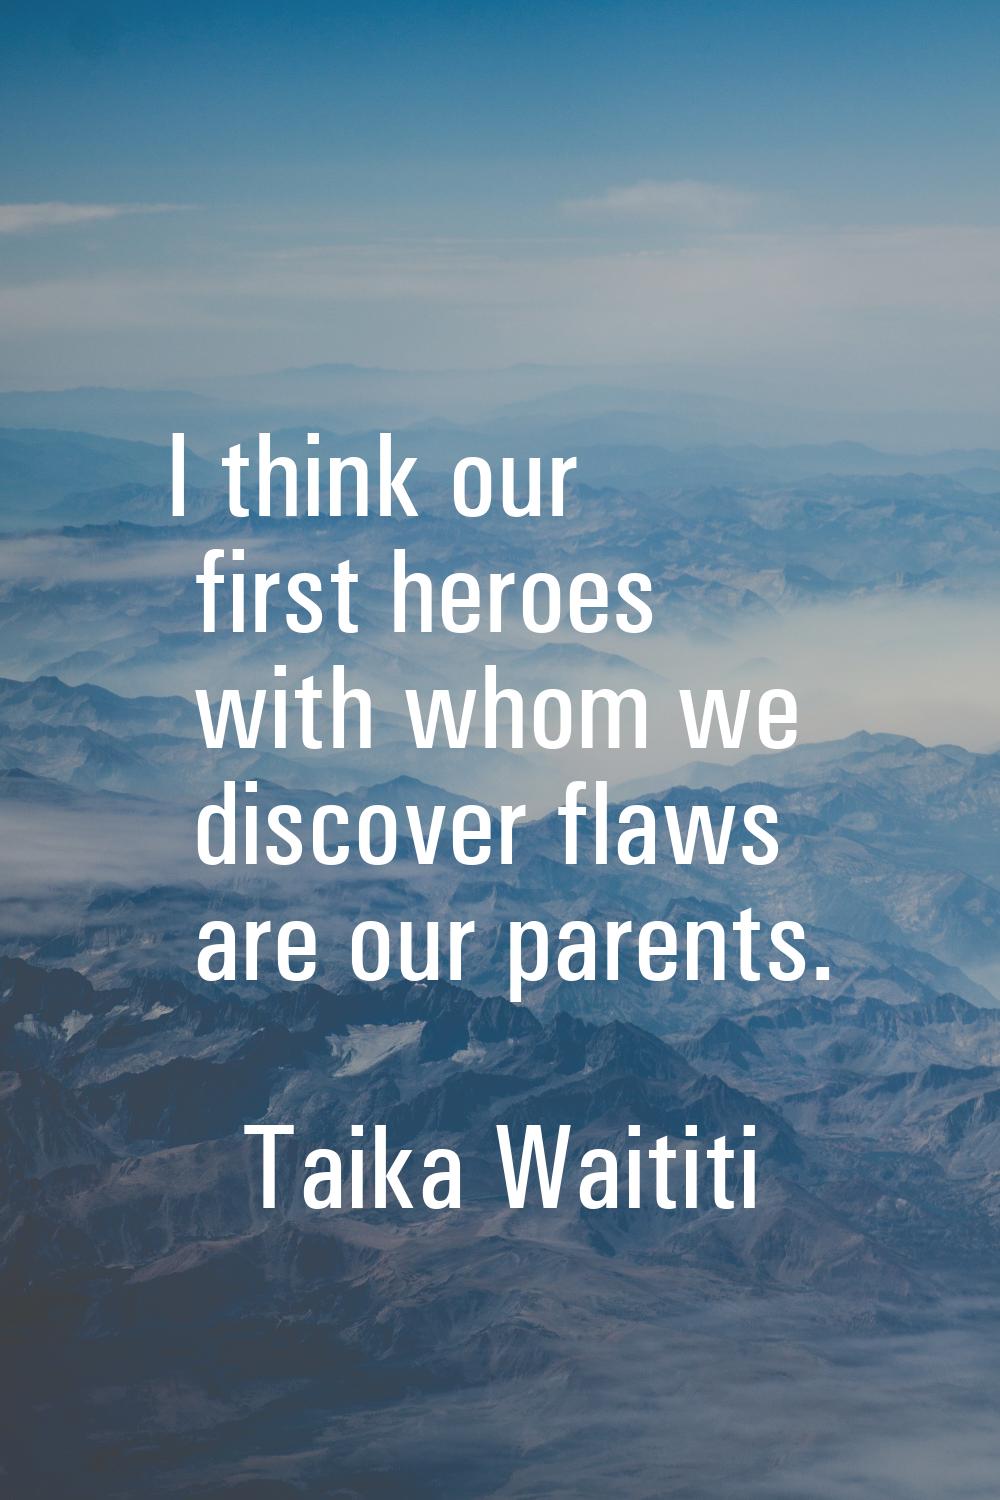 I think our first heroes with whom we discover flaws are our parents.